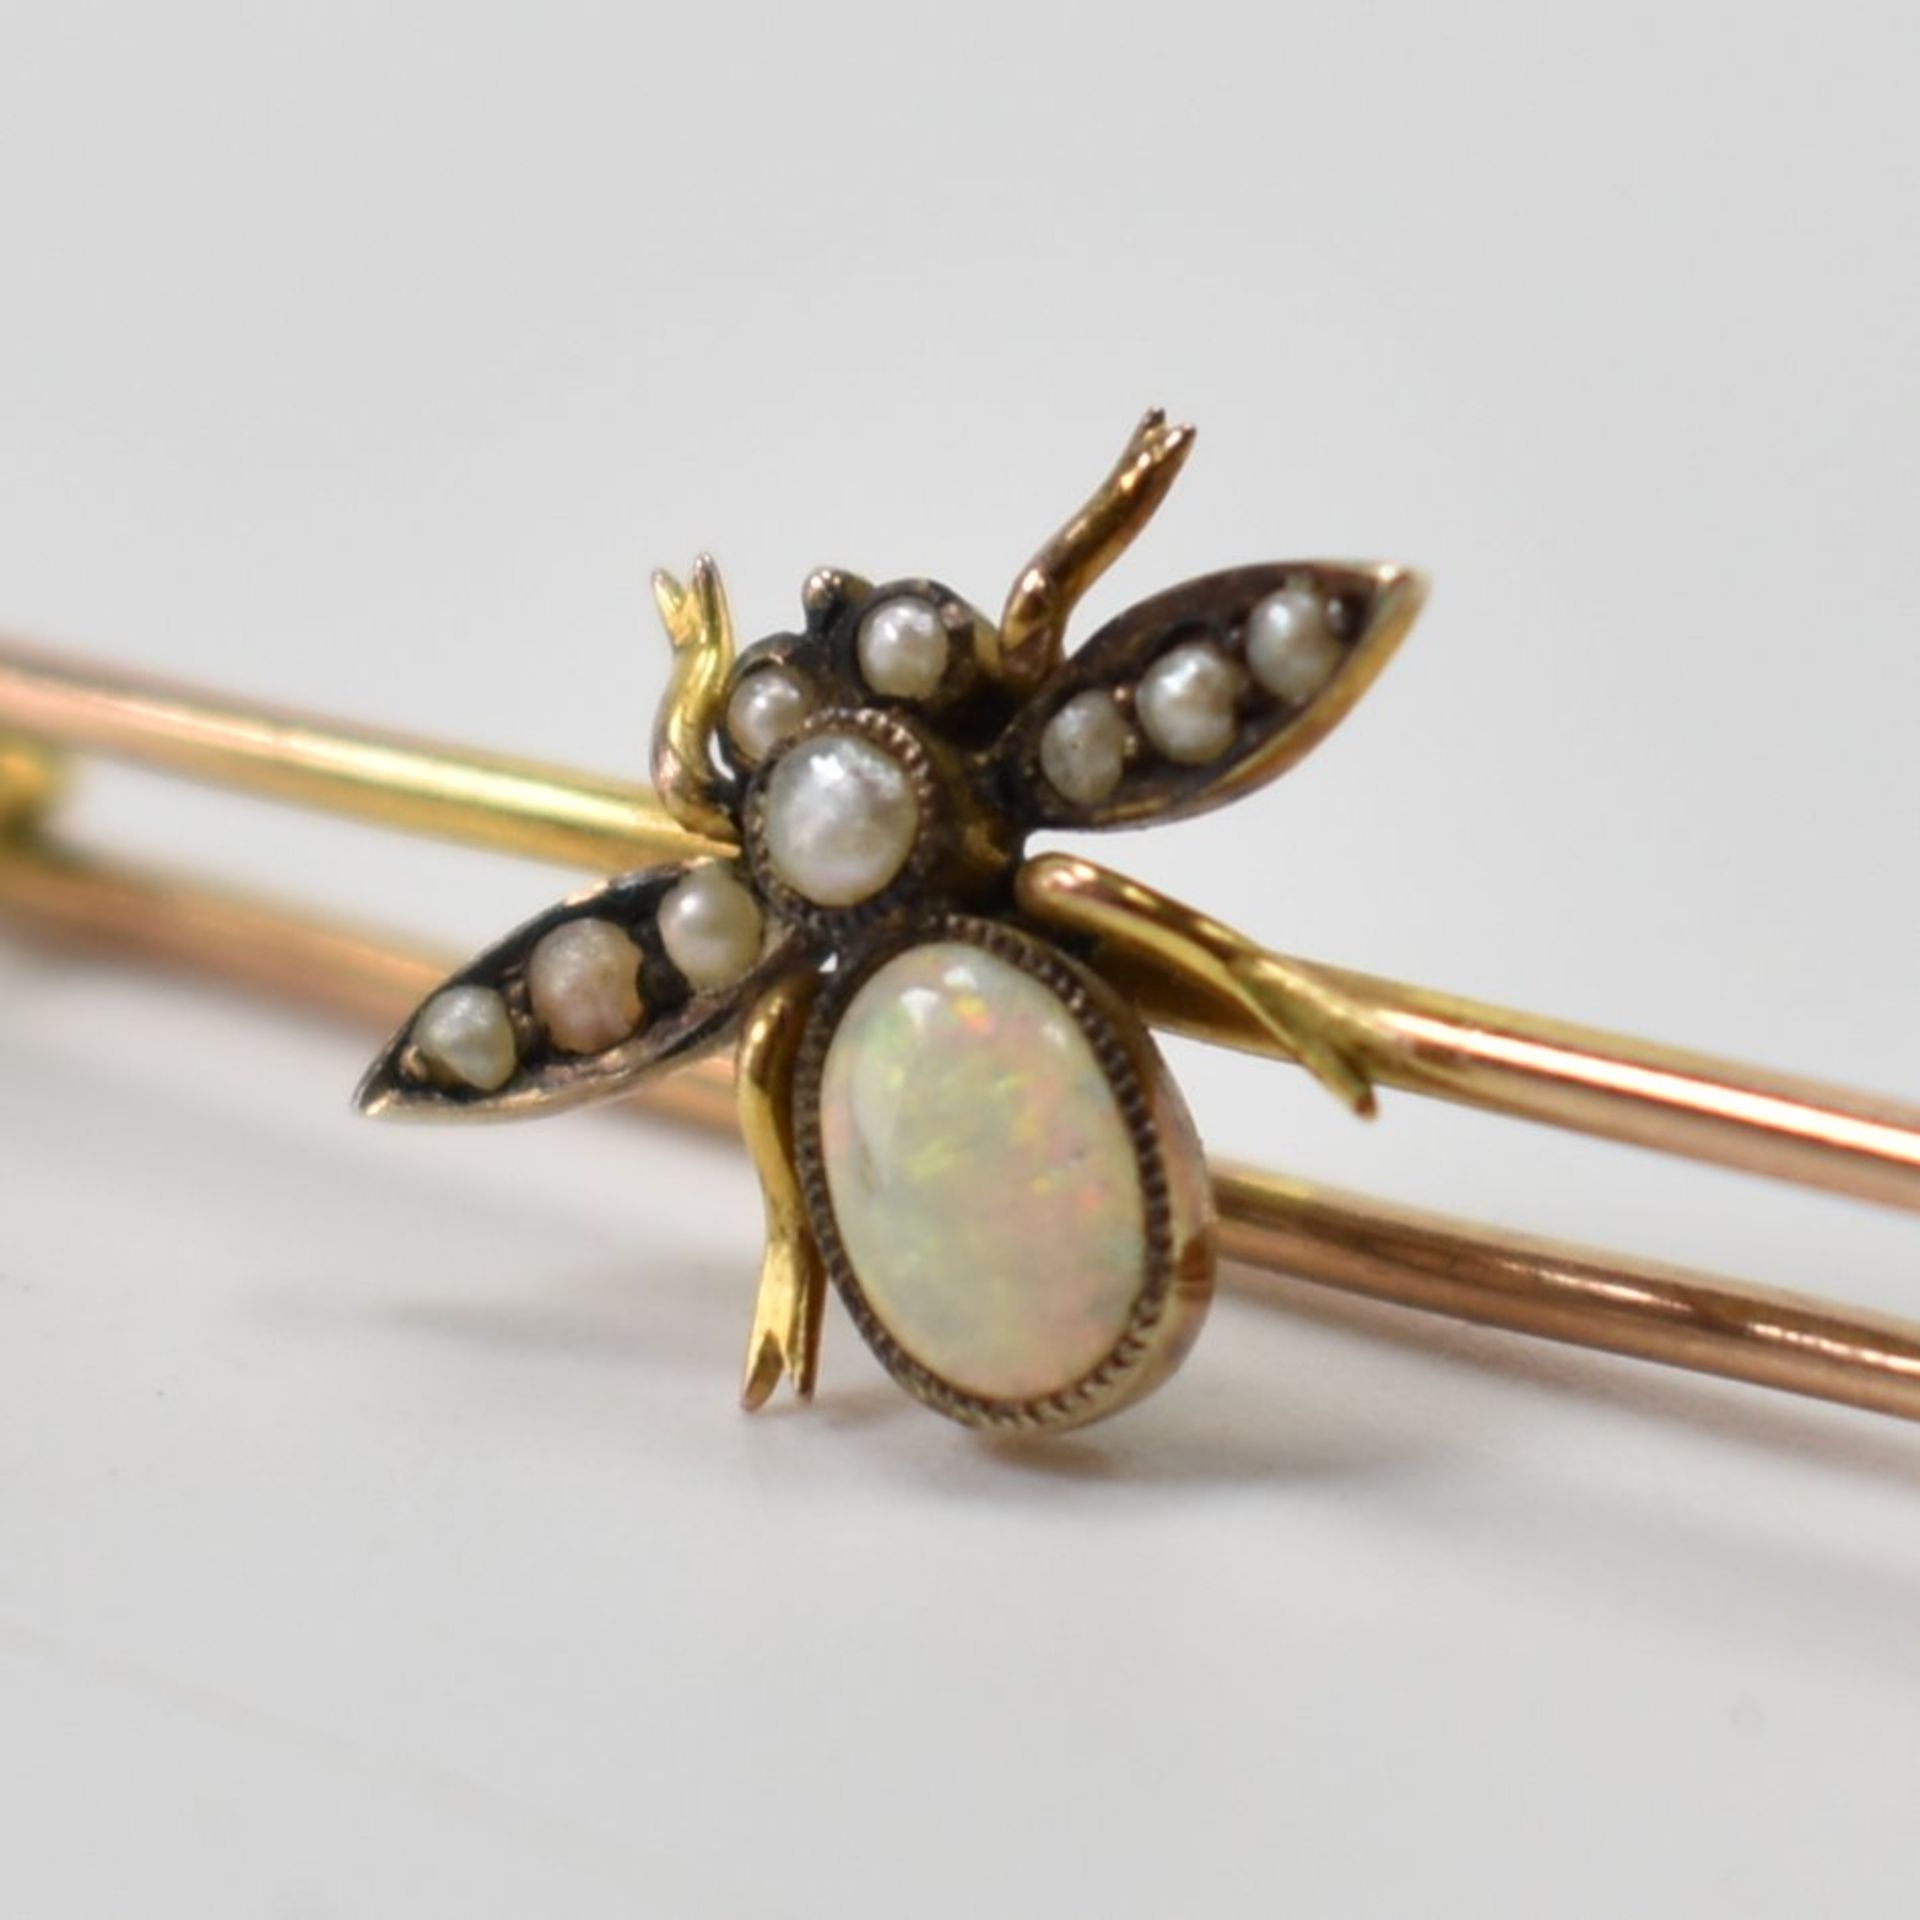 VICTORIAN 9CT GOLD OPAL & SEED PEARL BUG BROOCH - Image 7 of 9